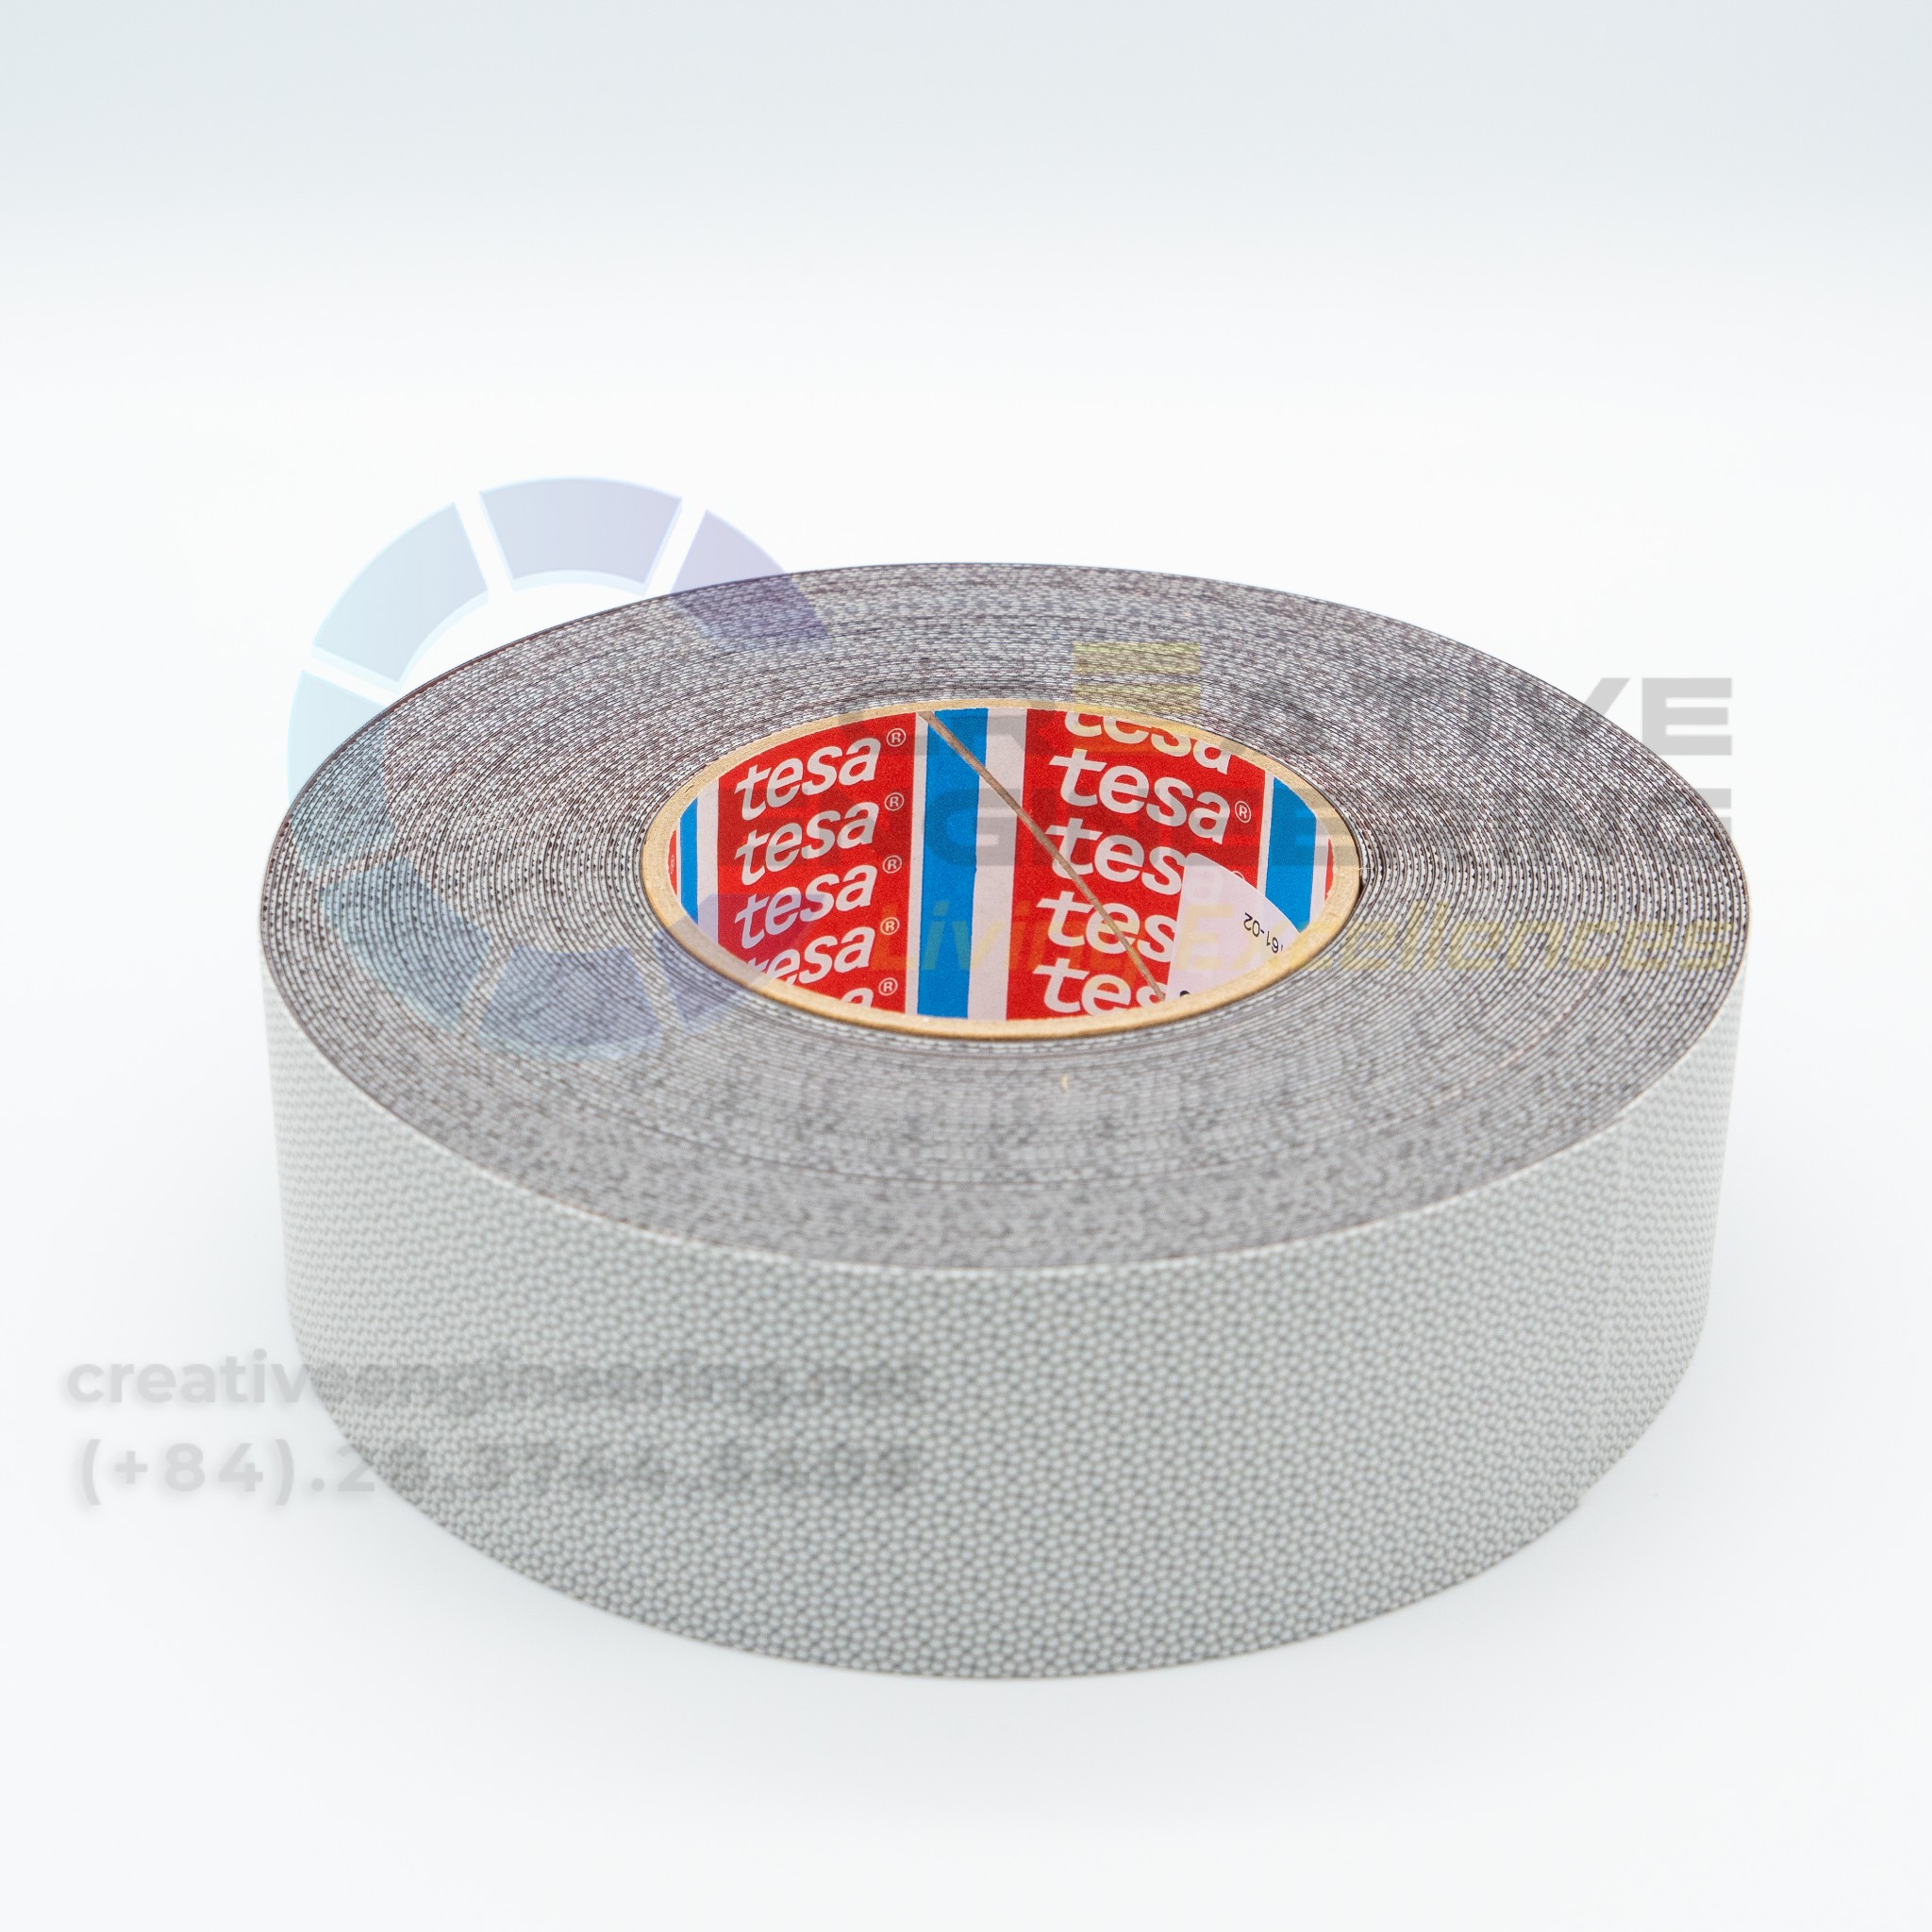 Tesa 4863 PV3 - Silicone coated roller wrapping tape - ce.com.vn